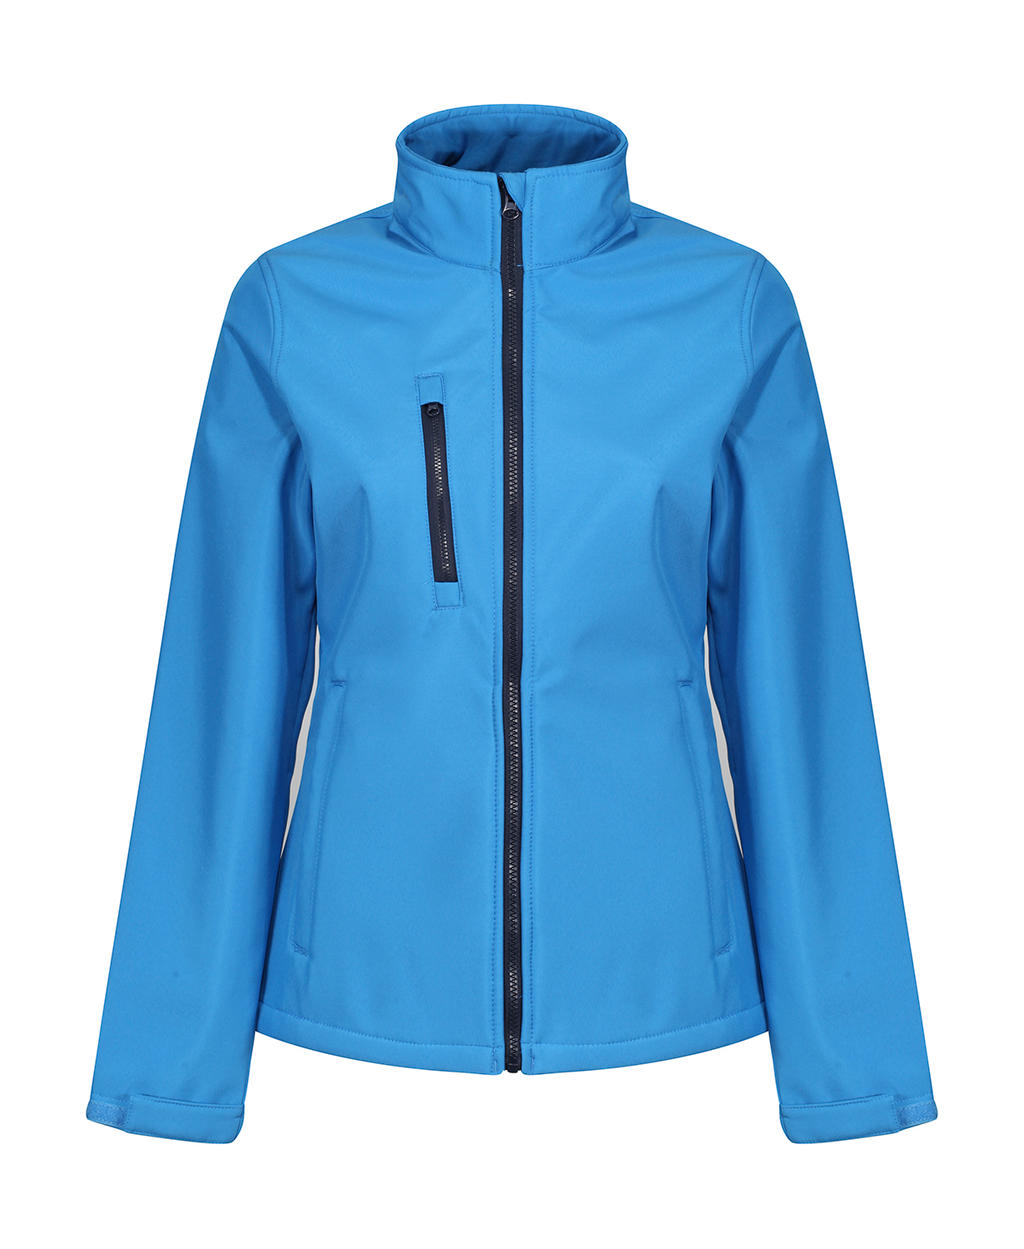  Womens Ablaze 3-Layer Softshell in Farbe French Blue/Navy